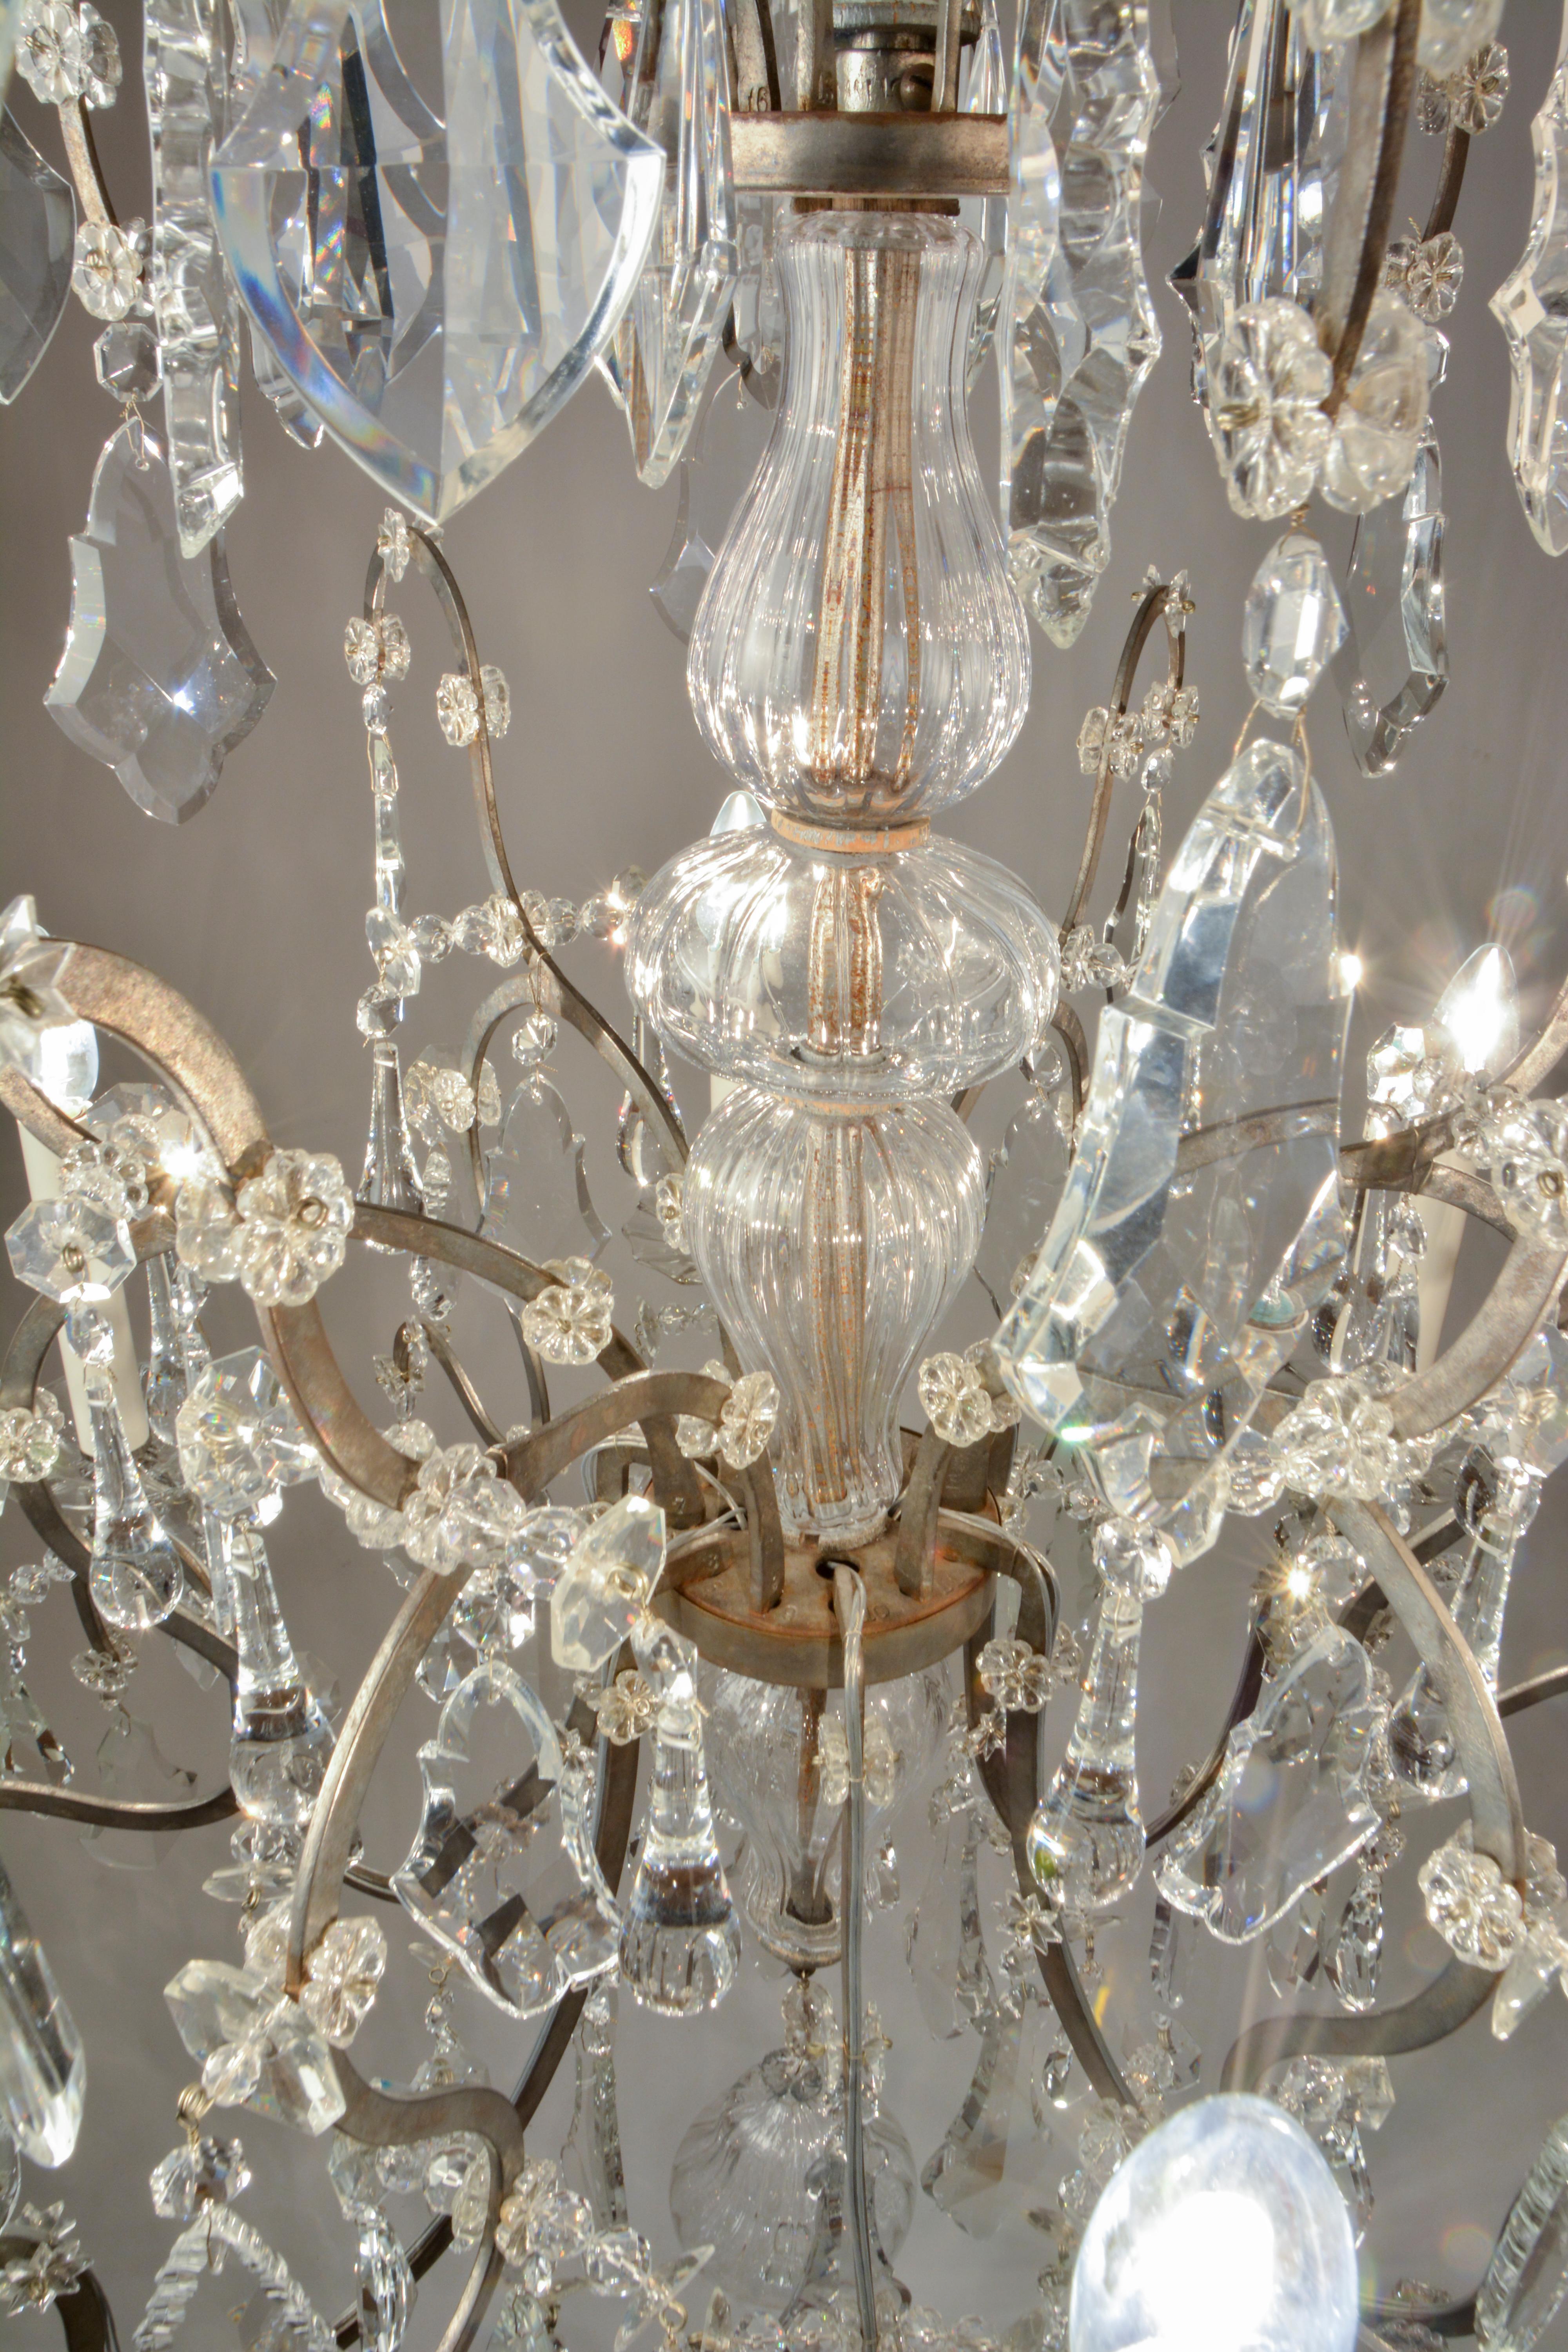 This is a wonderful example of high-Baroque wrought iron chandeliers. The frame has a protective zinc finish that is in good condition with minor fading. 
The crystals are hand-cut and polished and are complete. Missing parts have been replaced